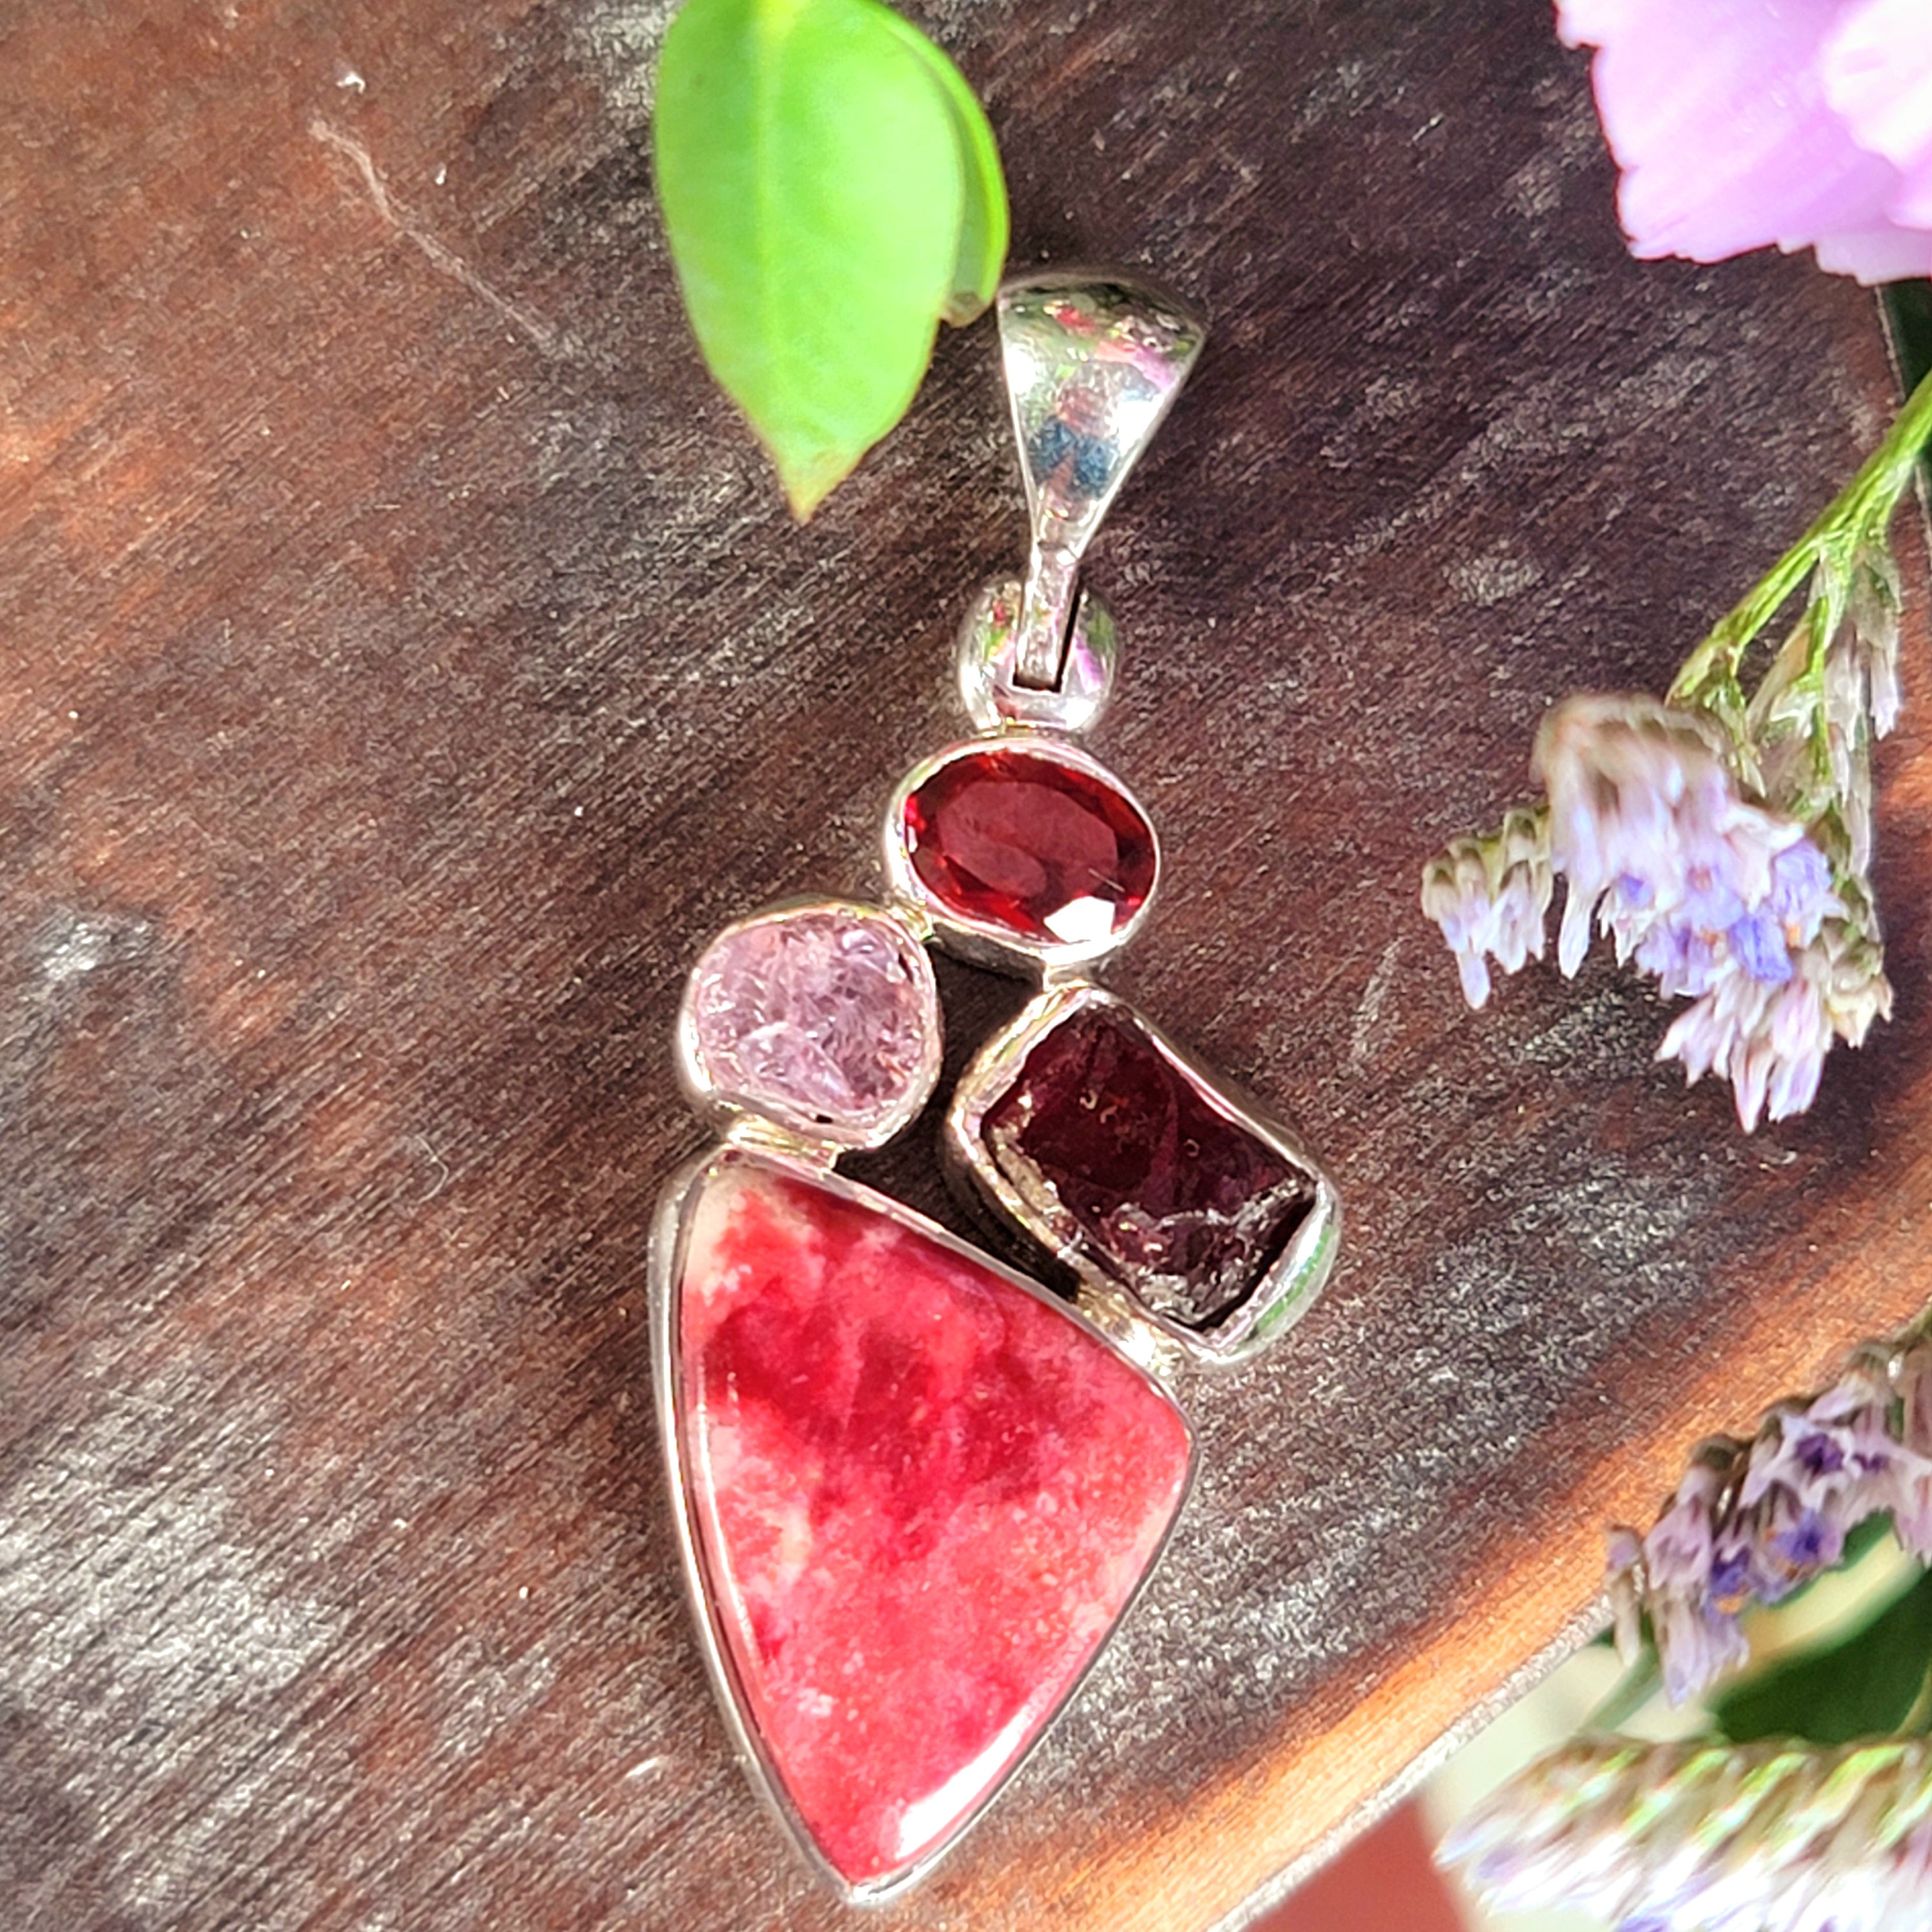 Thulite x Pink Tourmaline x Garnet x Rose Quartz Pendant .925 Silver for Loving Yourself and Experiencing Pleasure